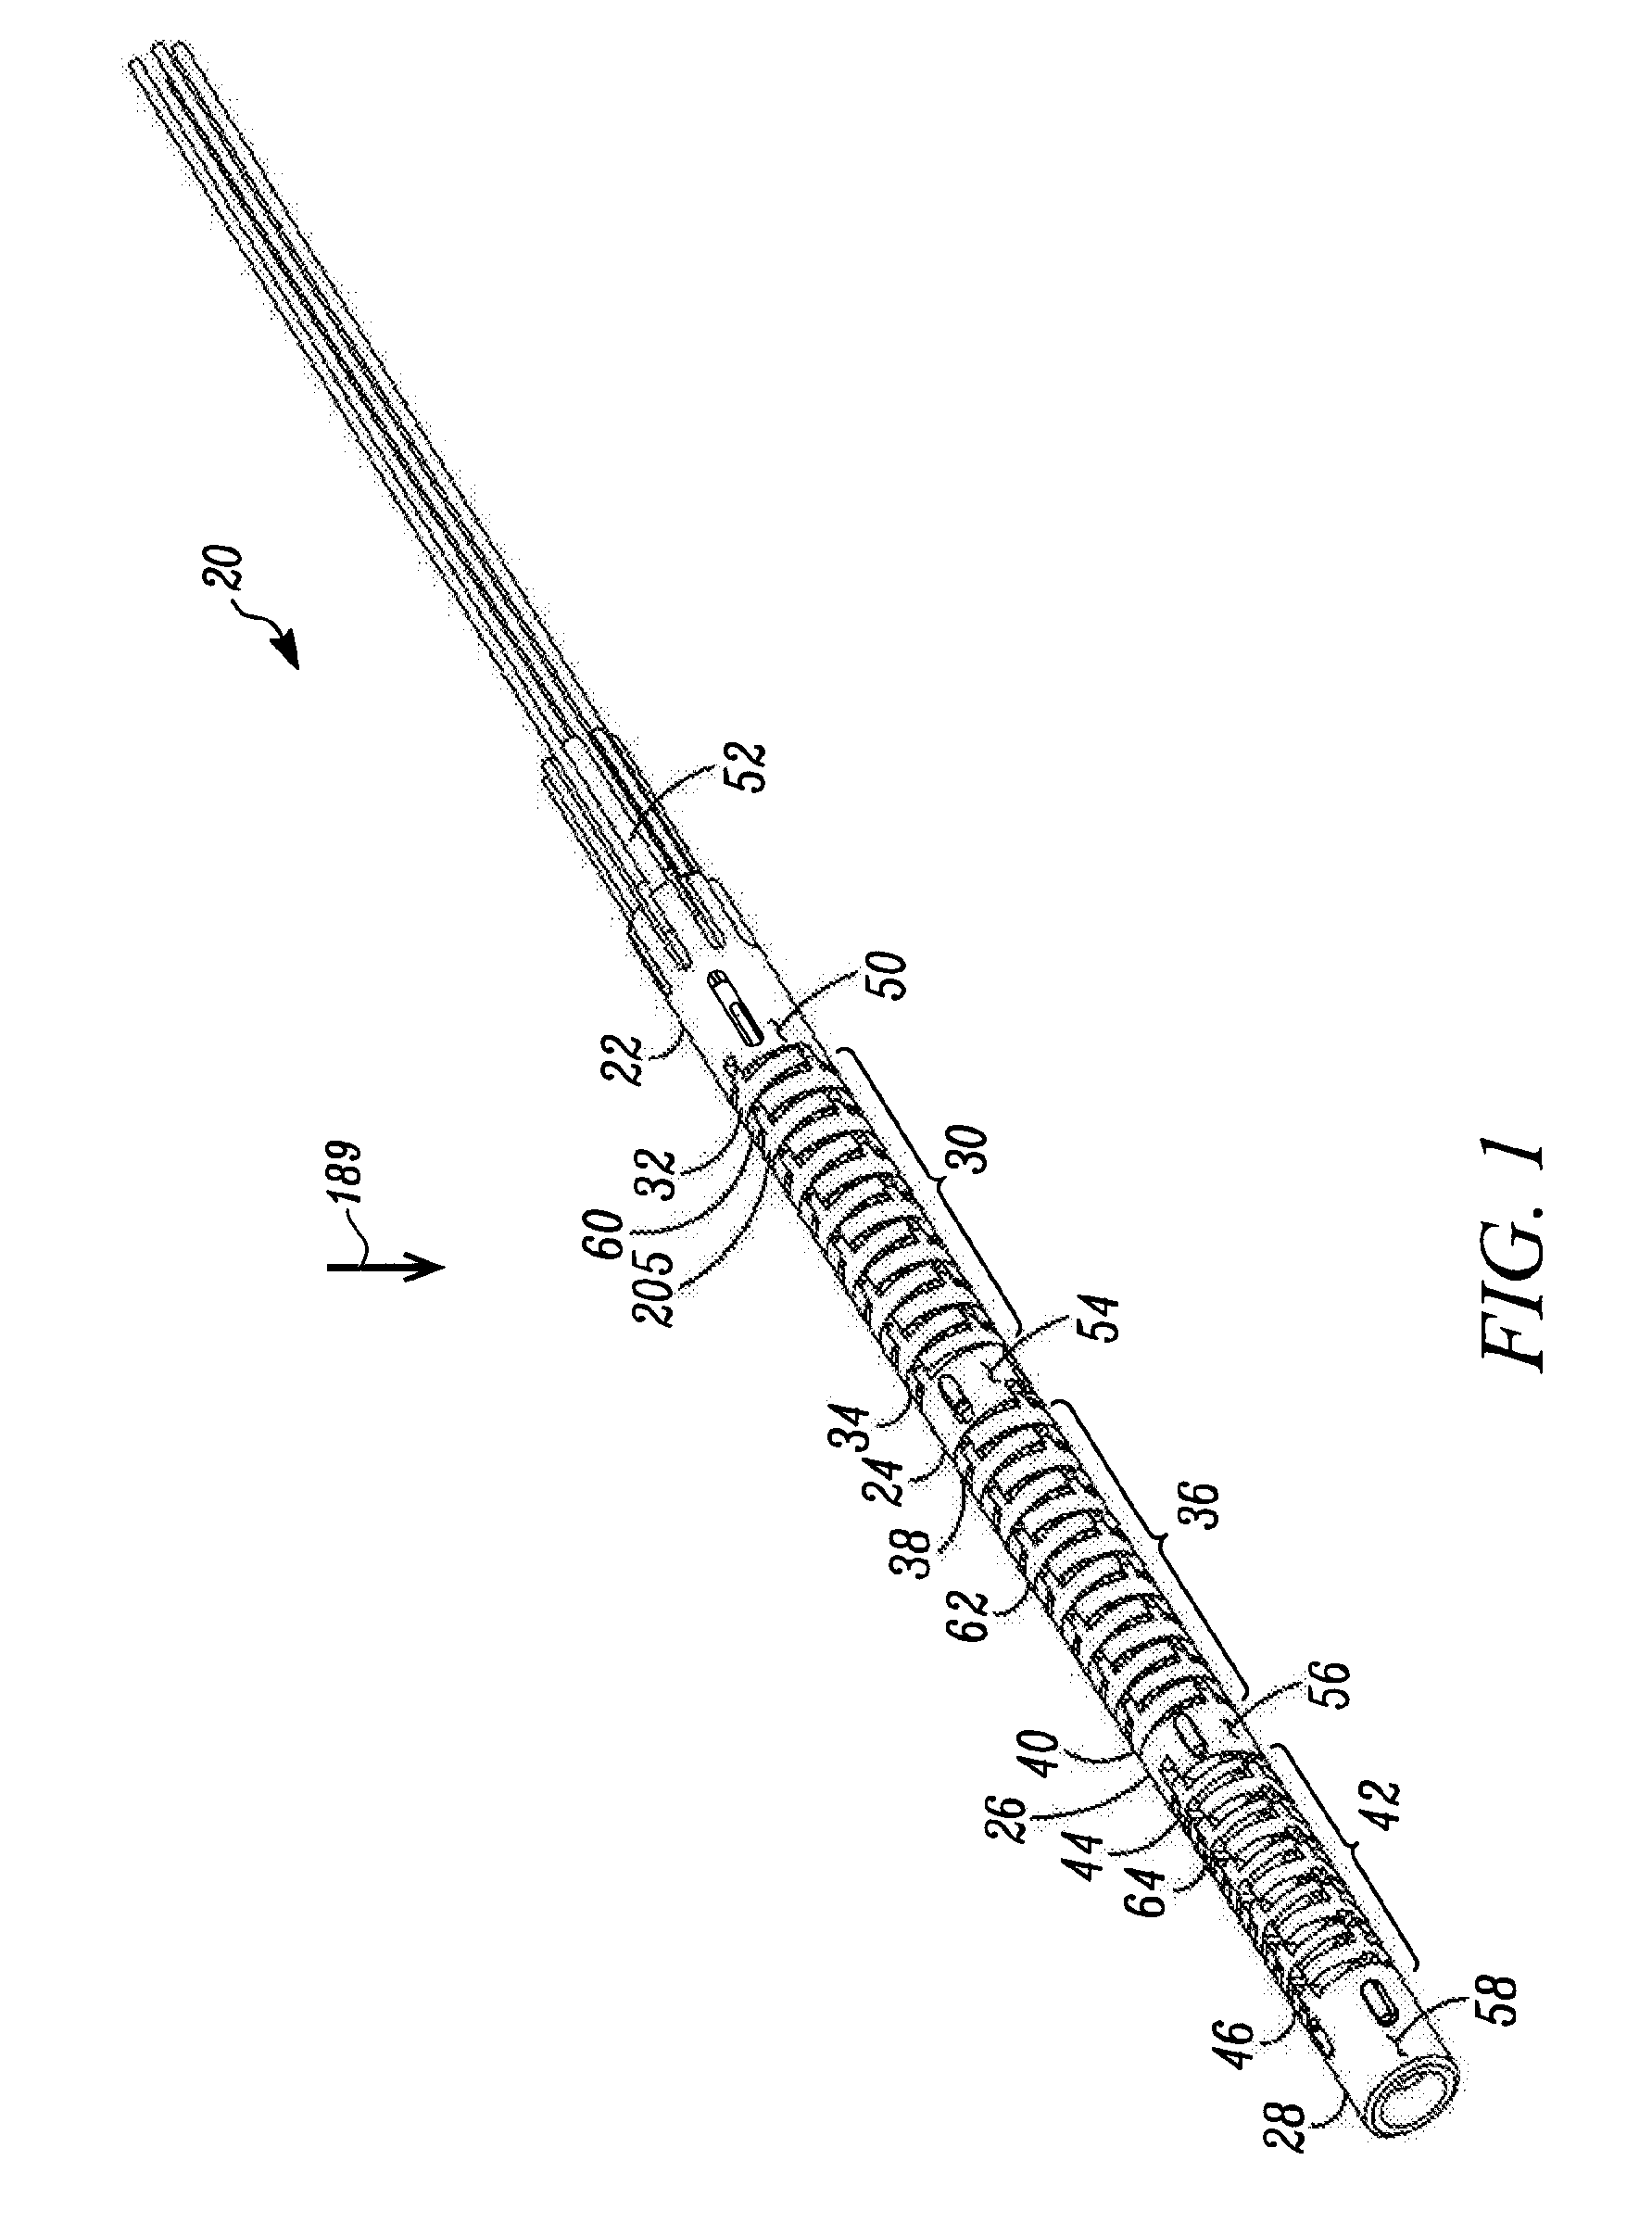 Articulated tool positioner and system employing same